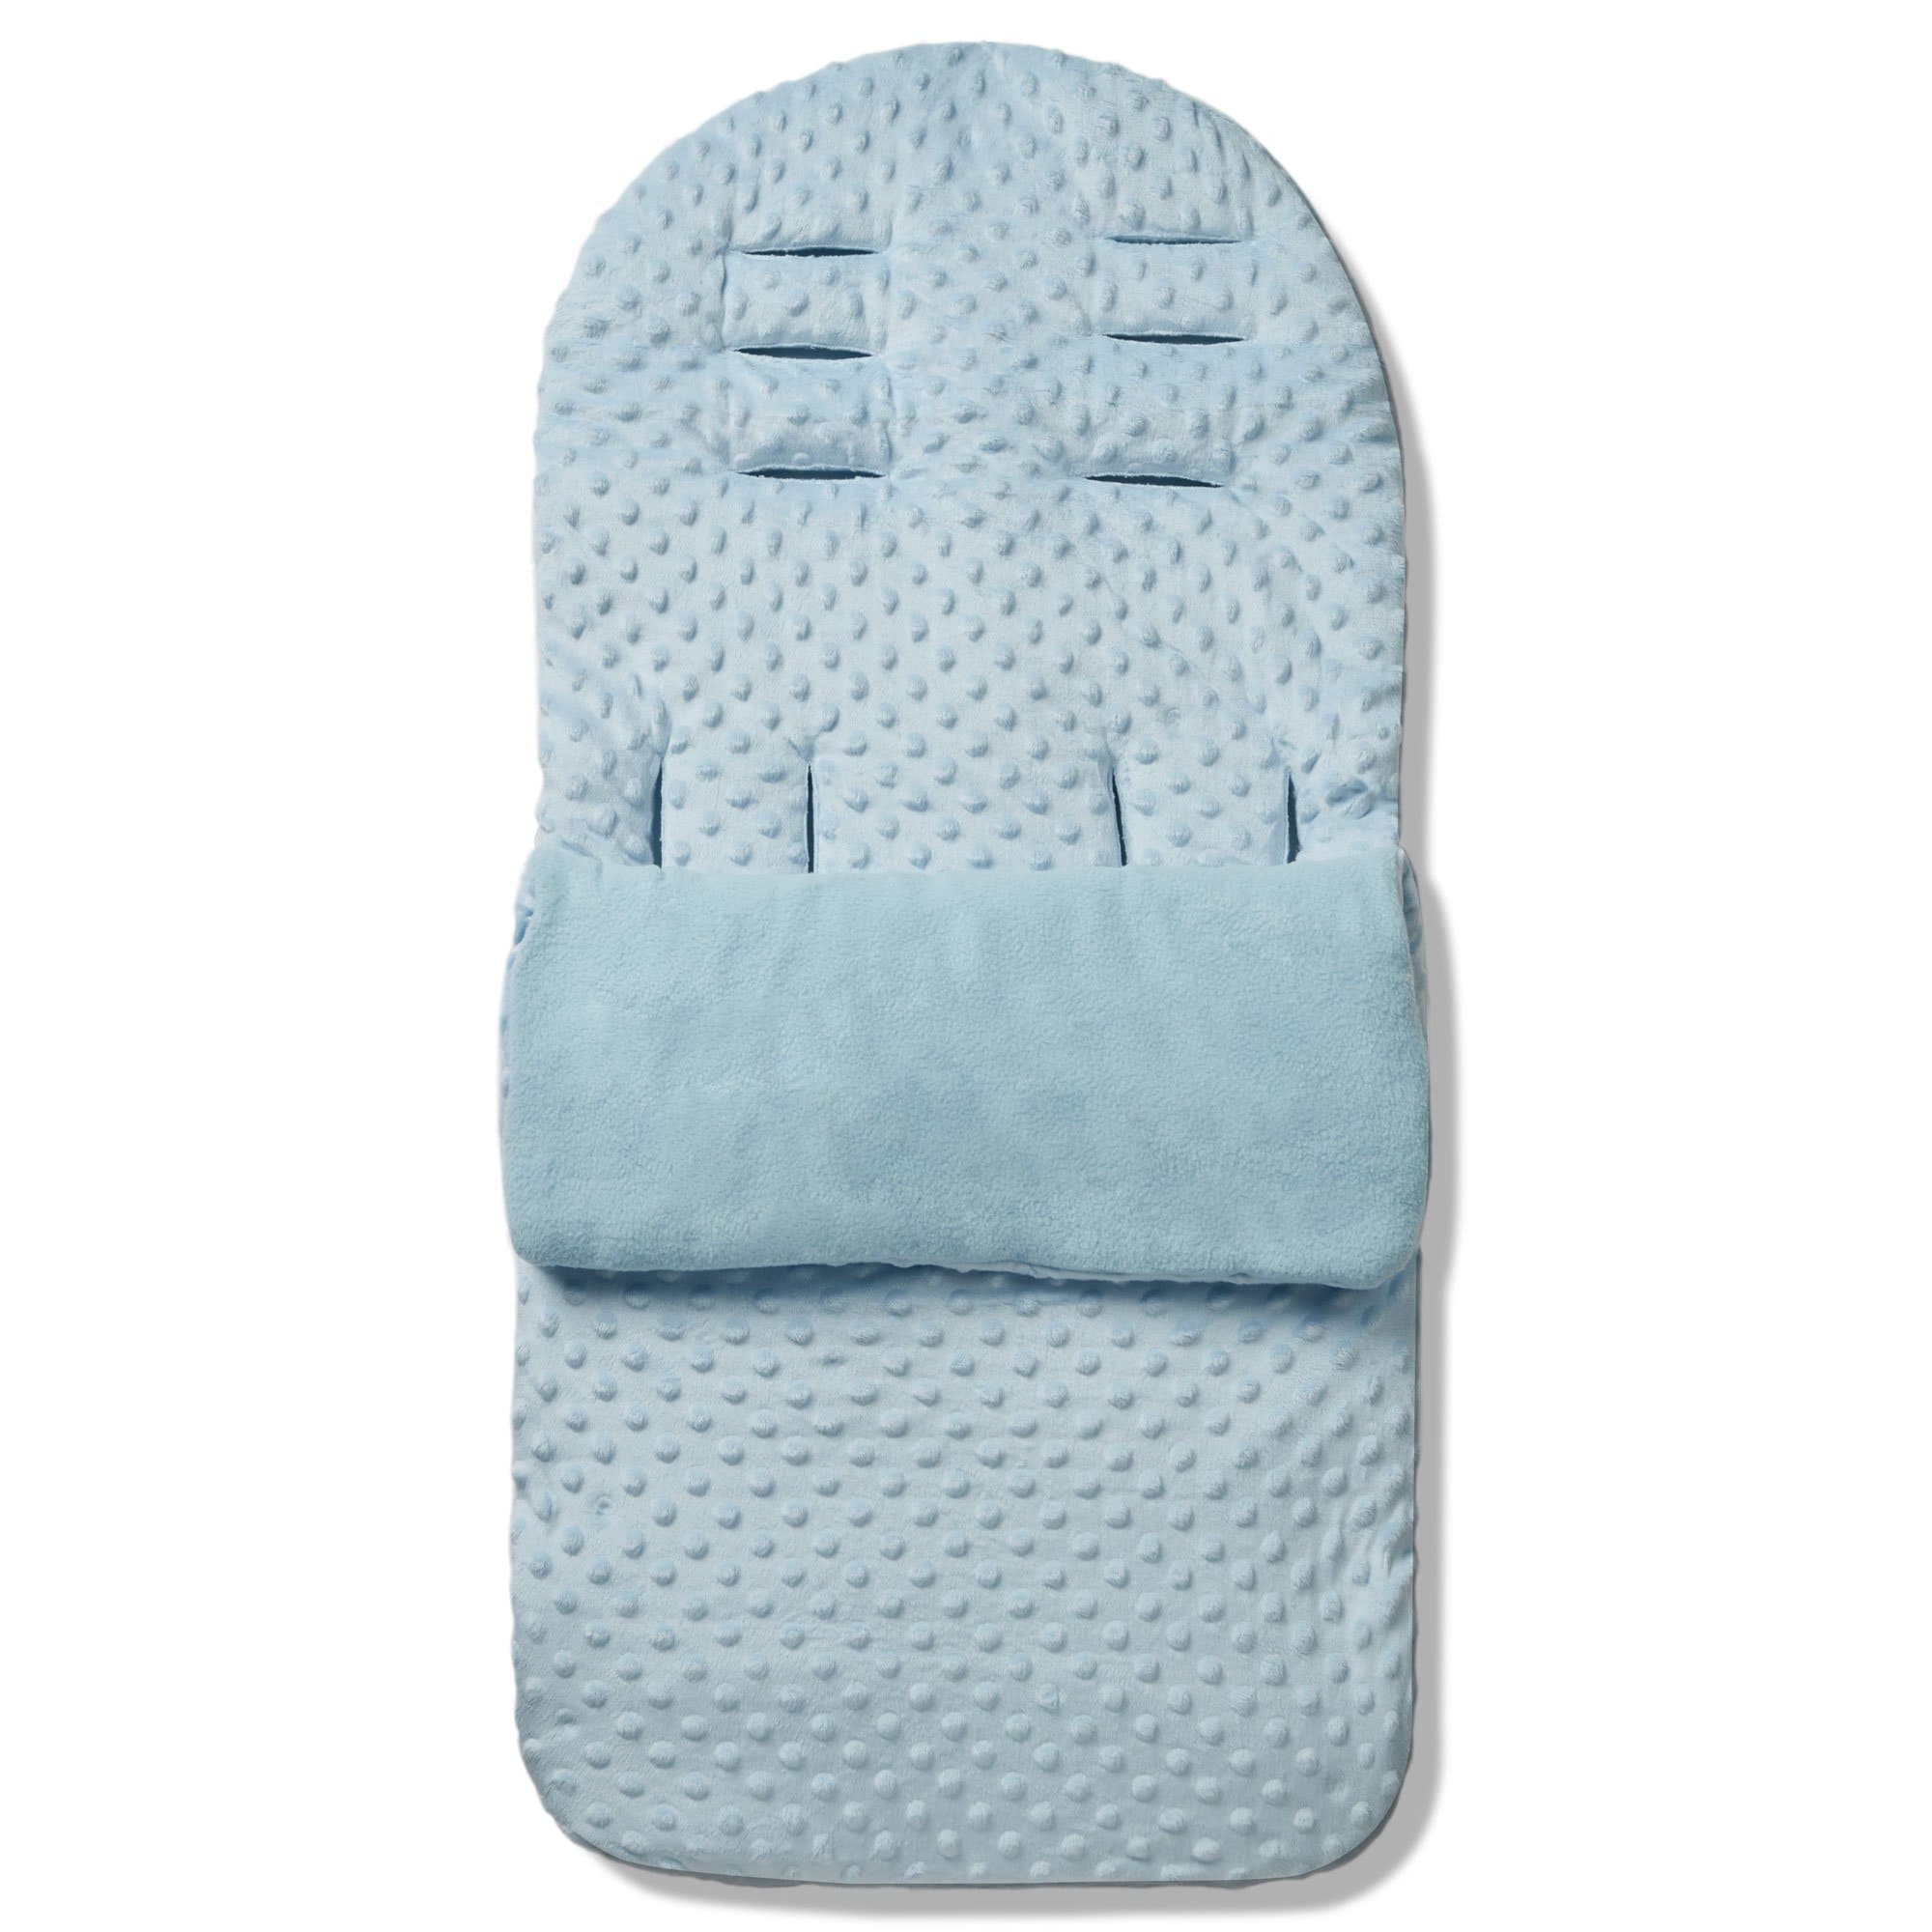 Dimple Footmuff / Cosy Toes Compatible with Looping - Blue / Fits All Models | For Your Little One